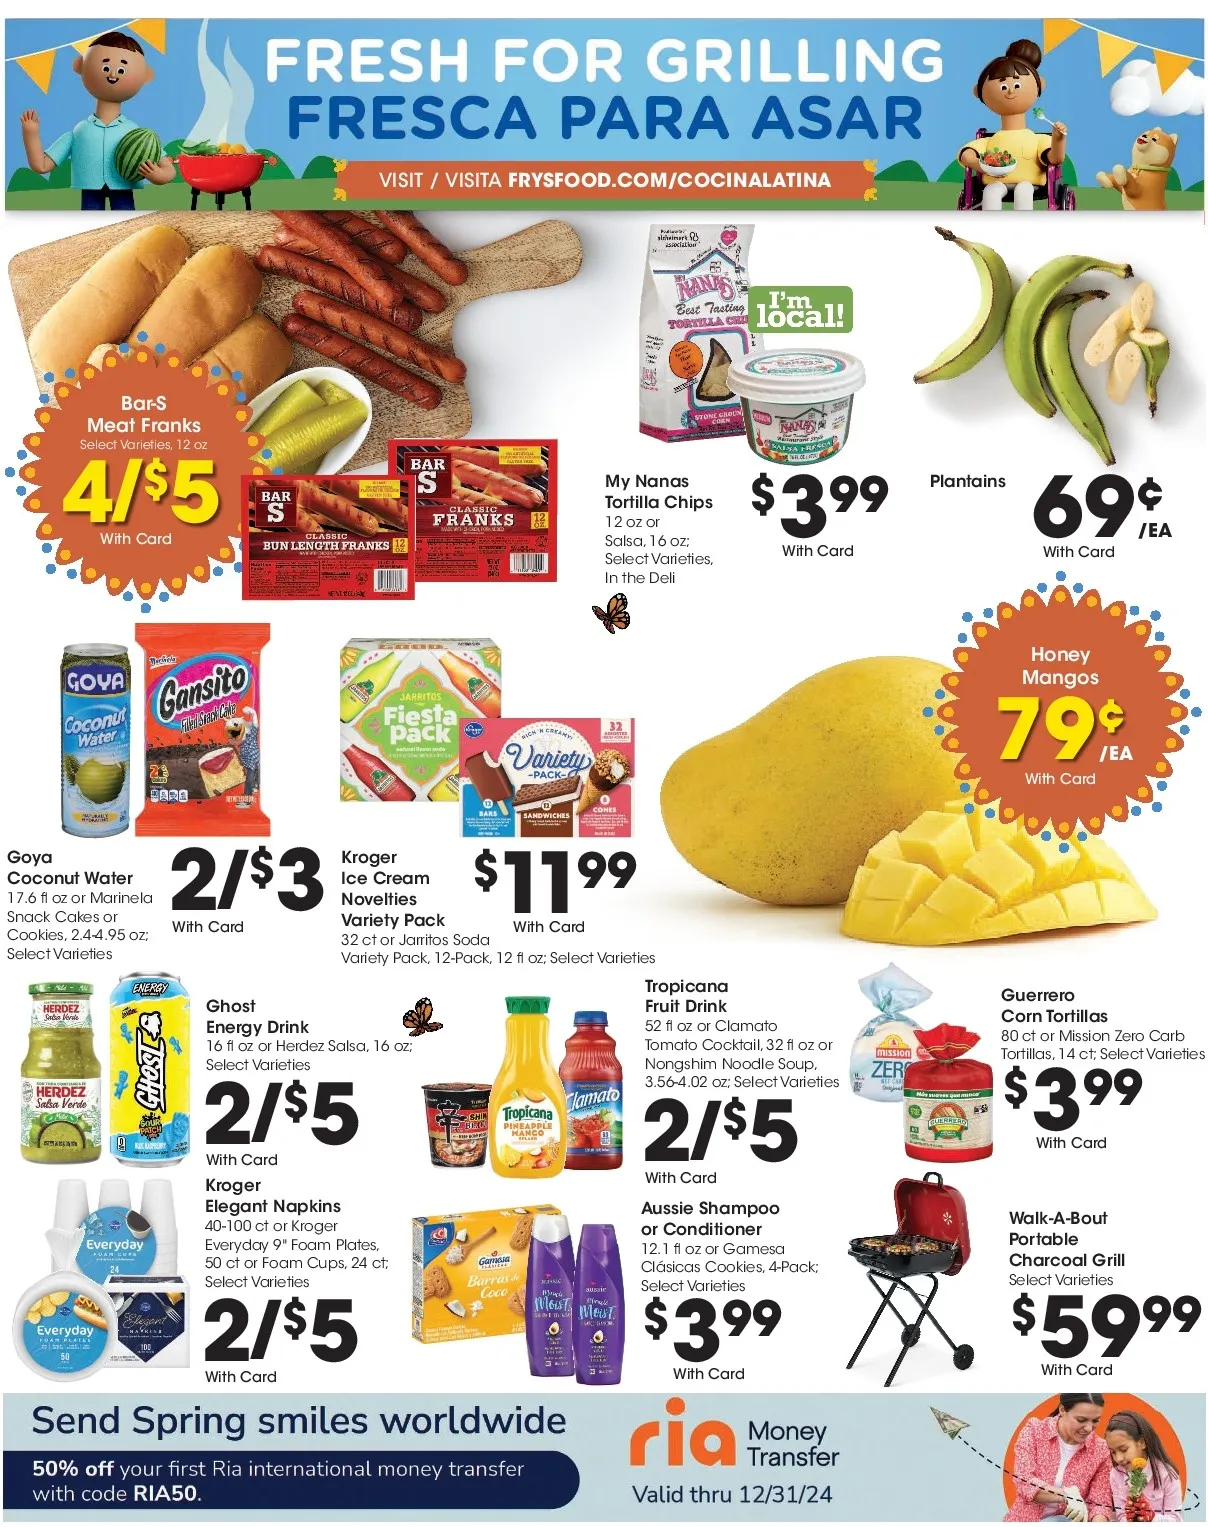 Fry's Food Weekly Ad July 2024 Weekly Sales, Deals, Discounts and Digital Coupons.